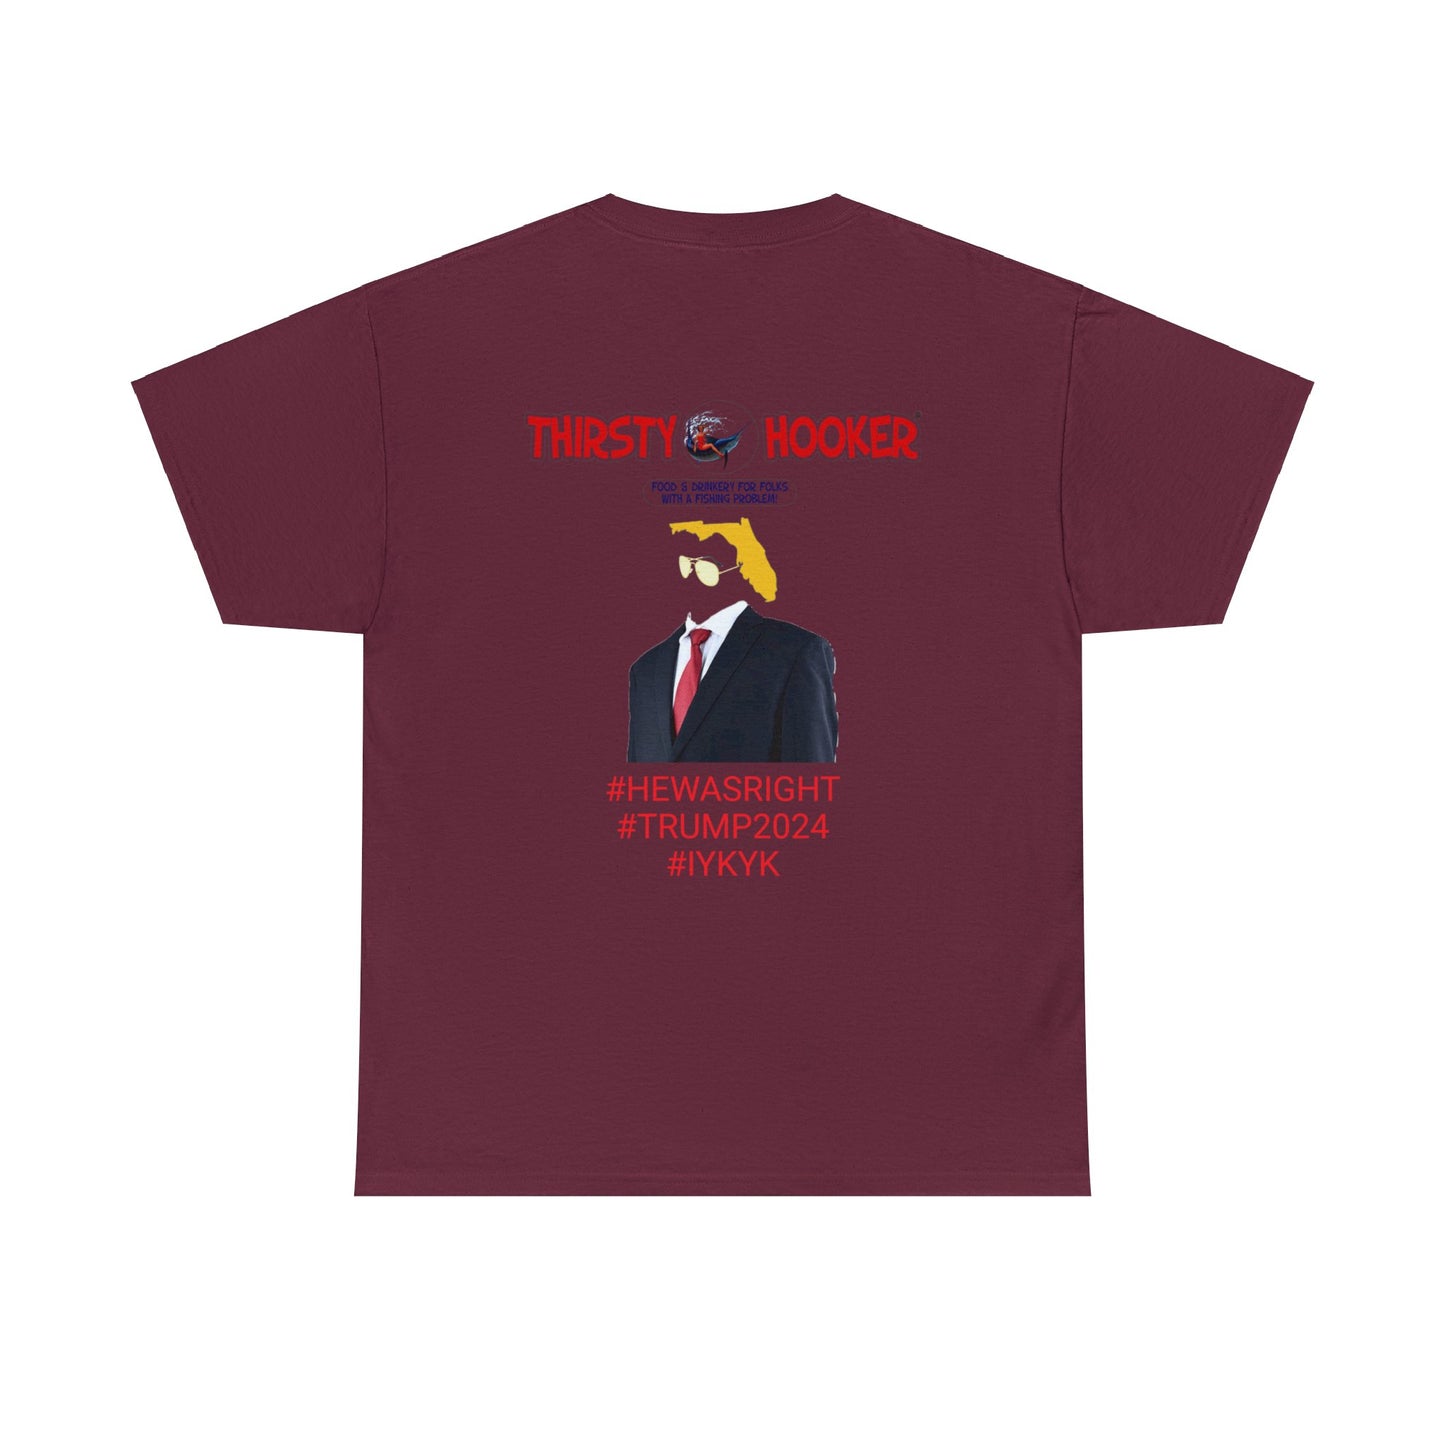 "HE WAS RIGHT" Tee